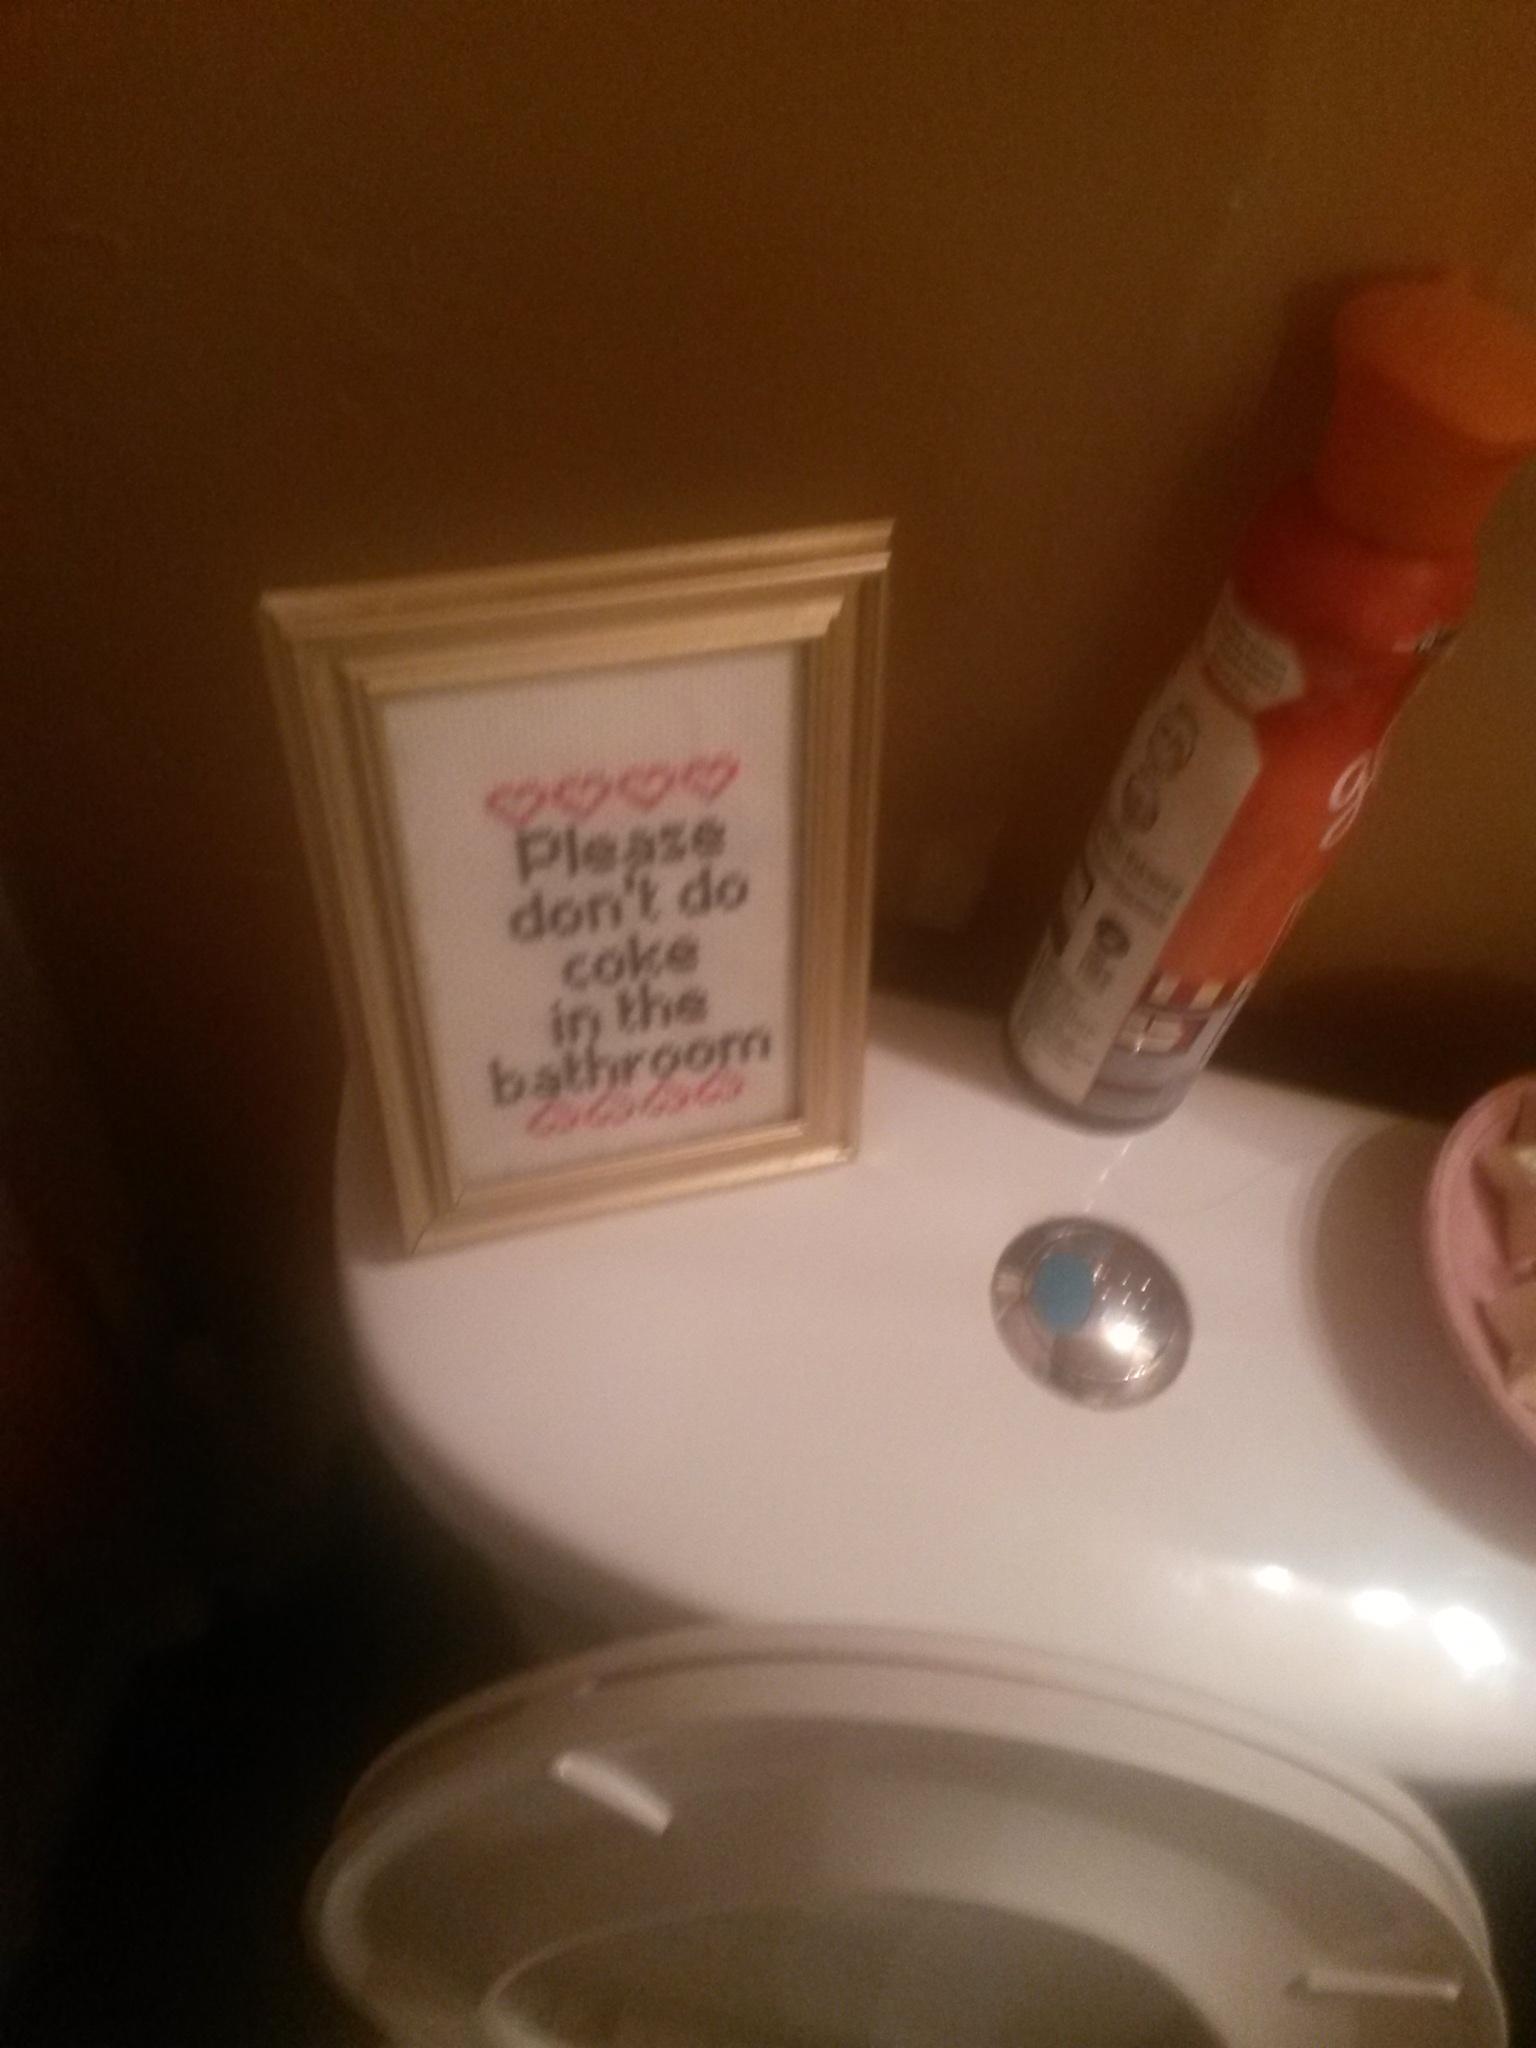 Went to a party last night and saw this in the bathroom.